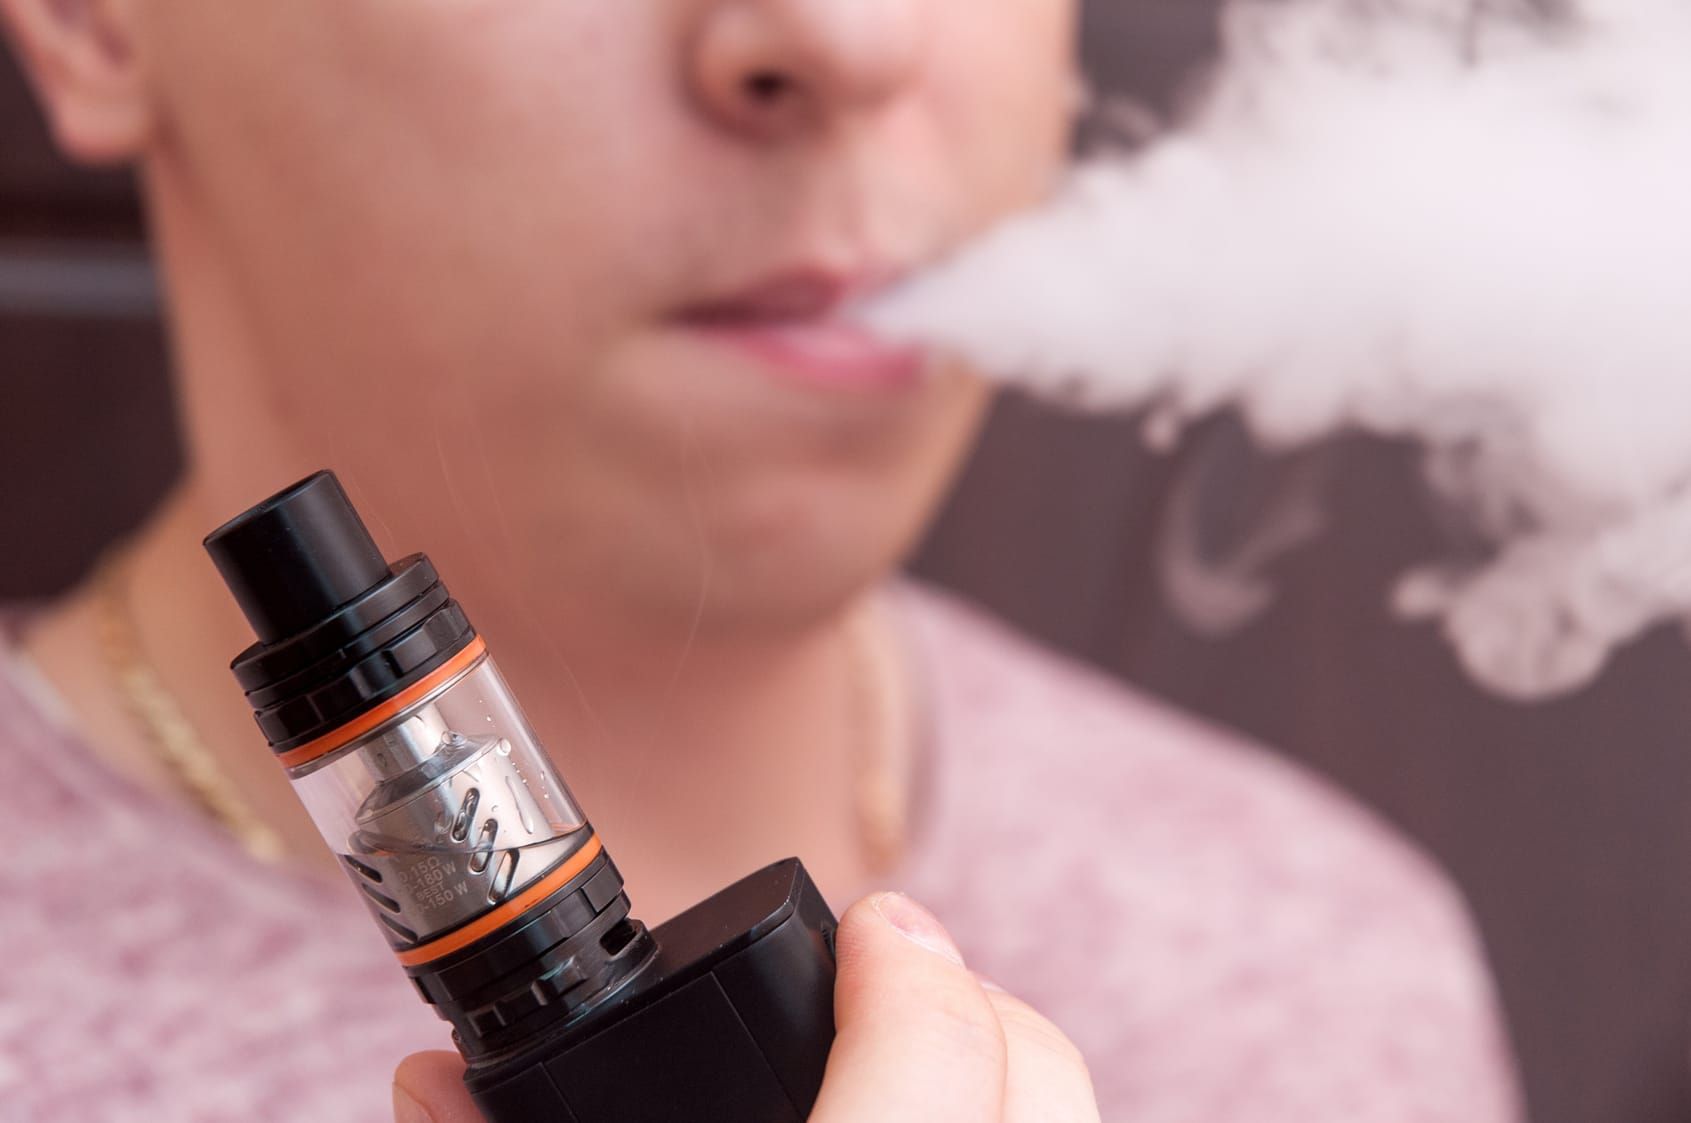 Men vaping and releases a cloud of vapor